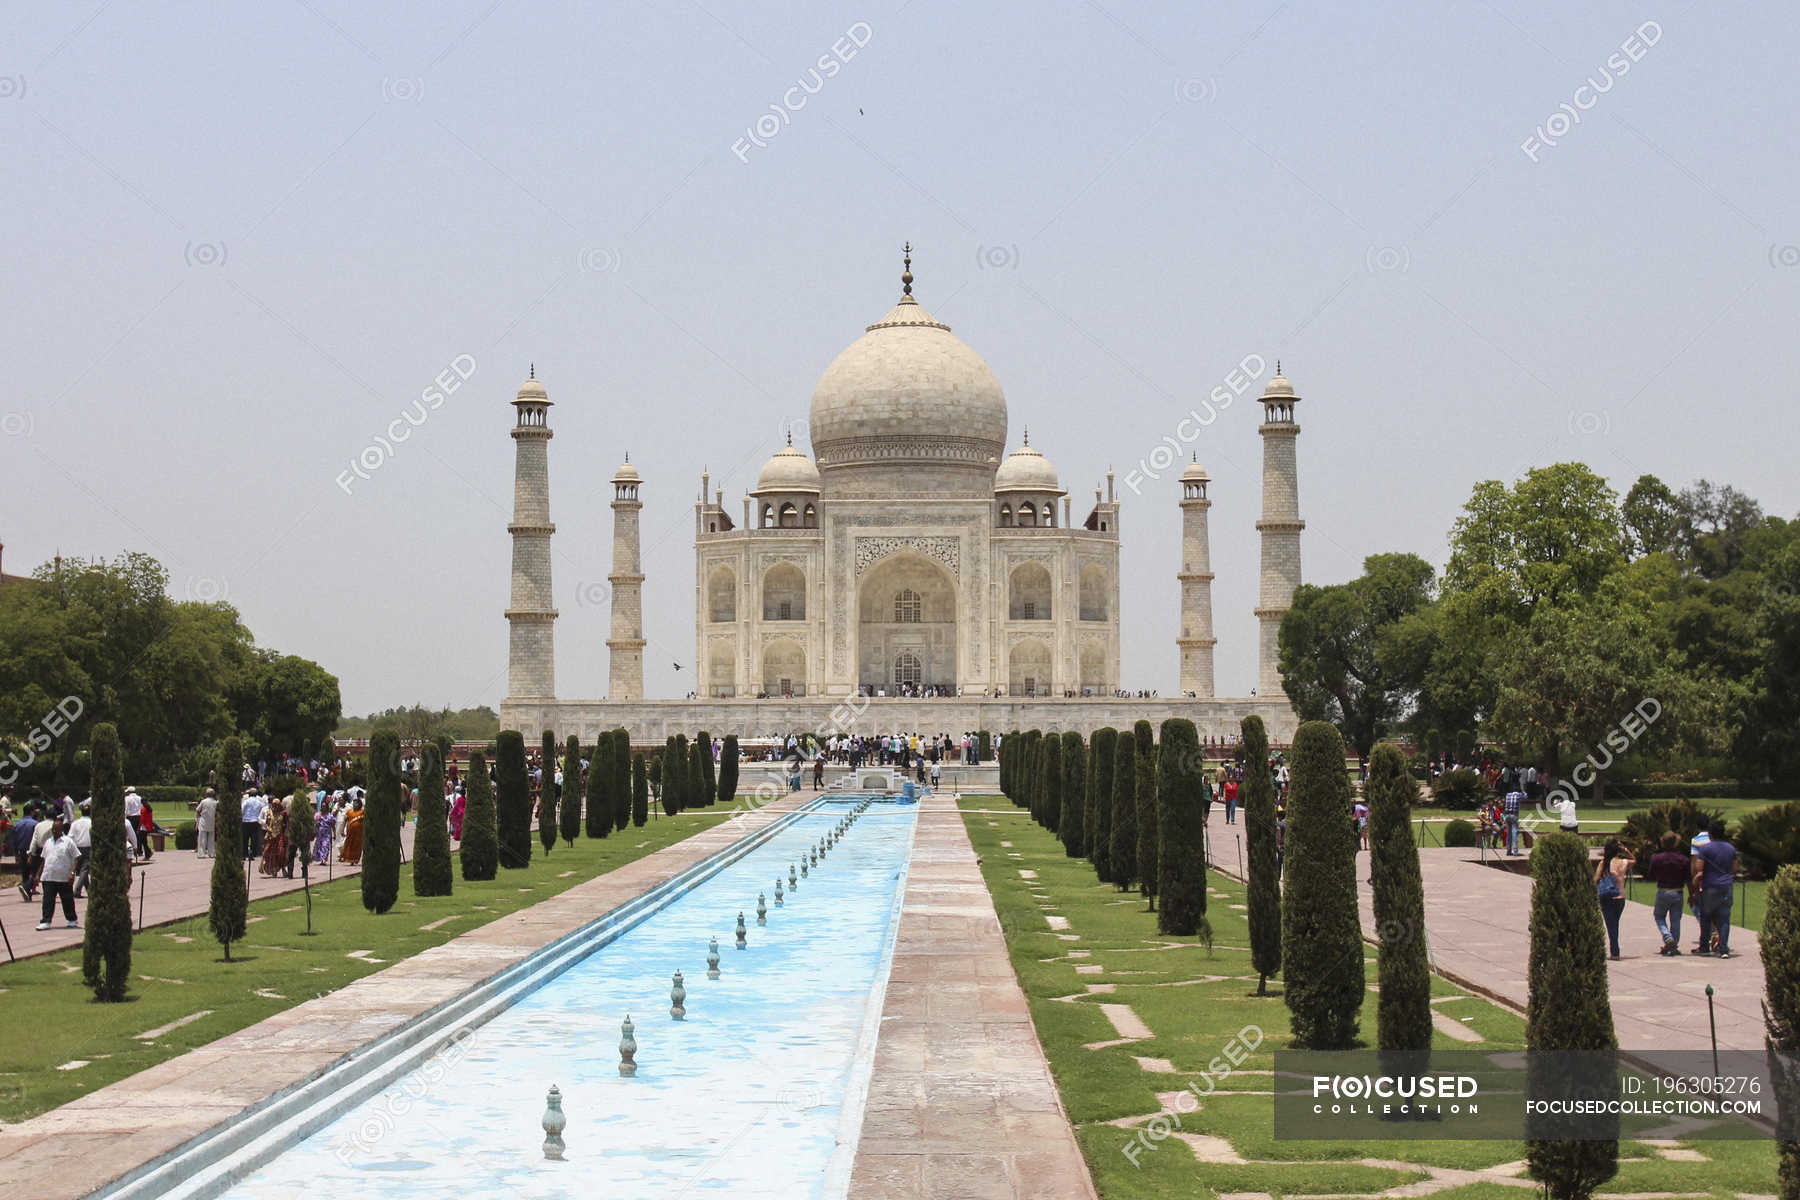 Exterior of Taj Mahal against clear sky on sunny day — ripples, UNESCO  World Heritage Site - Stock Photo | #196305276